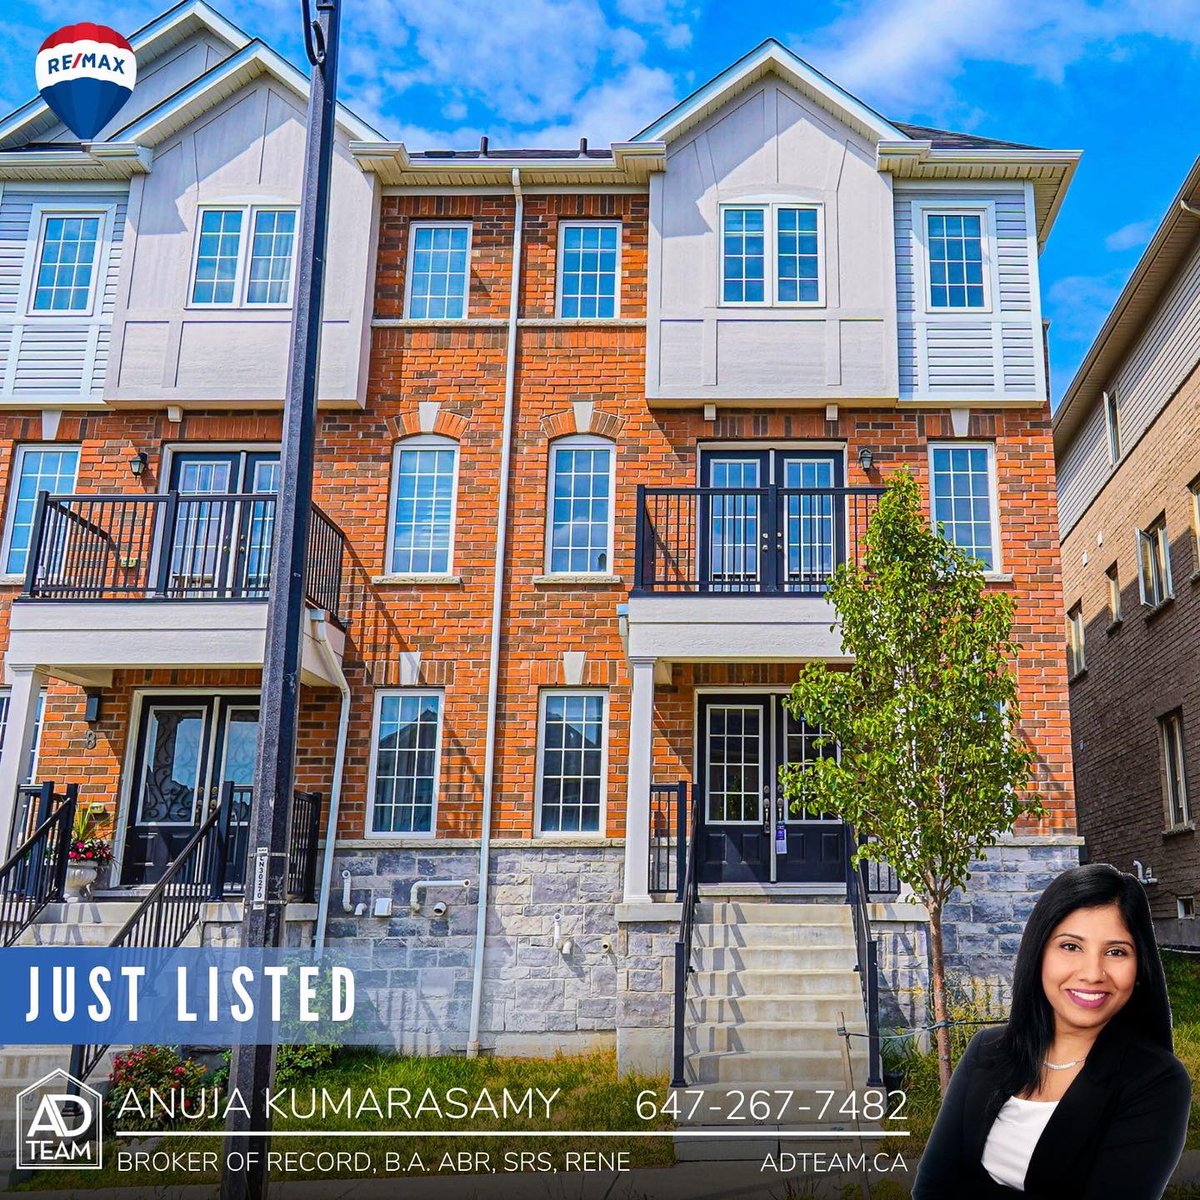 JUST LISTED🏡 10 CAMILLERI RD., AJAX
💰 $799,900
📍Audley/Rossland
🔹 4 🛏 & 4 🛁
☎️ Call Us For Your Personal Tour @ 647-267-7482

#justlisted #forsale #listedforsale #newlisting #semidetachedhome #adtem #anujatherealtor #remaxrealtron #remax #1realtor #AjaxRealtor #ajaxHomes